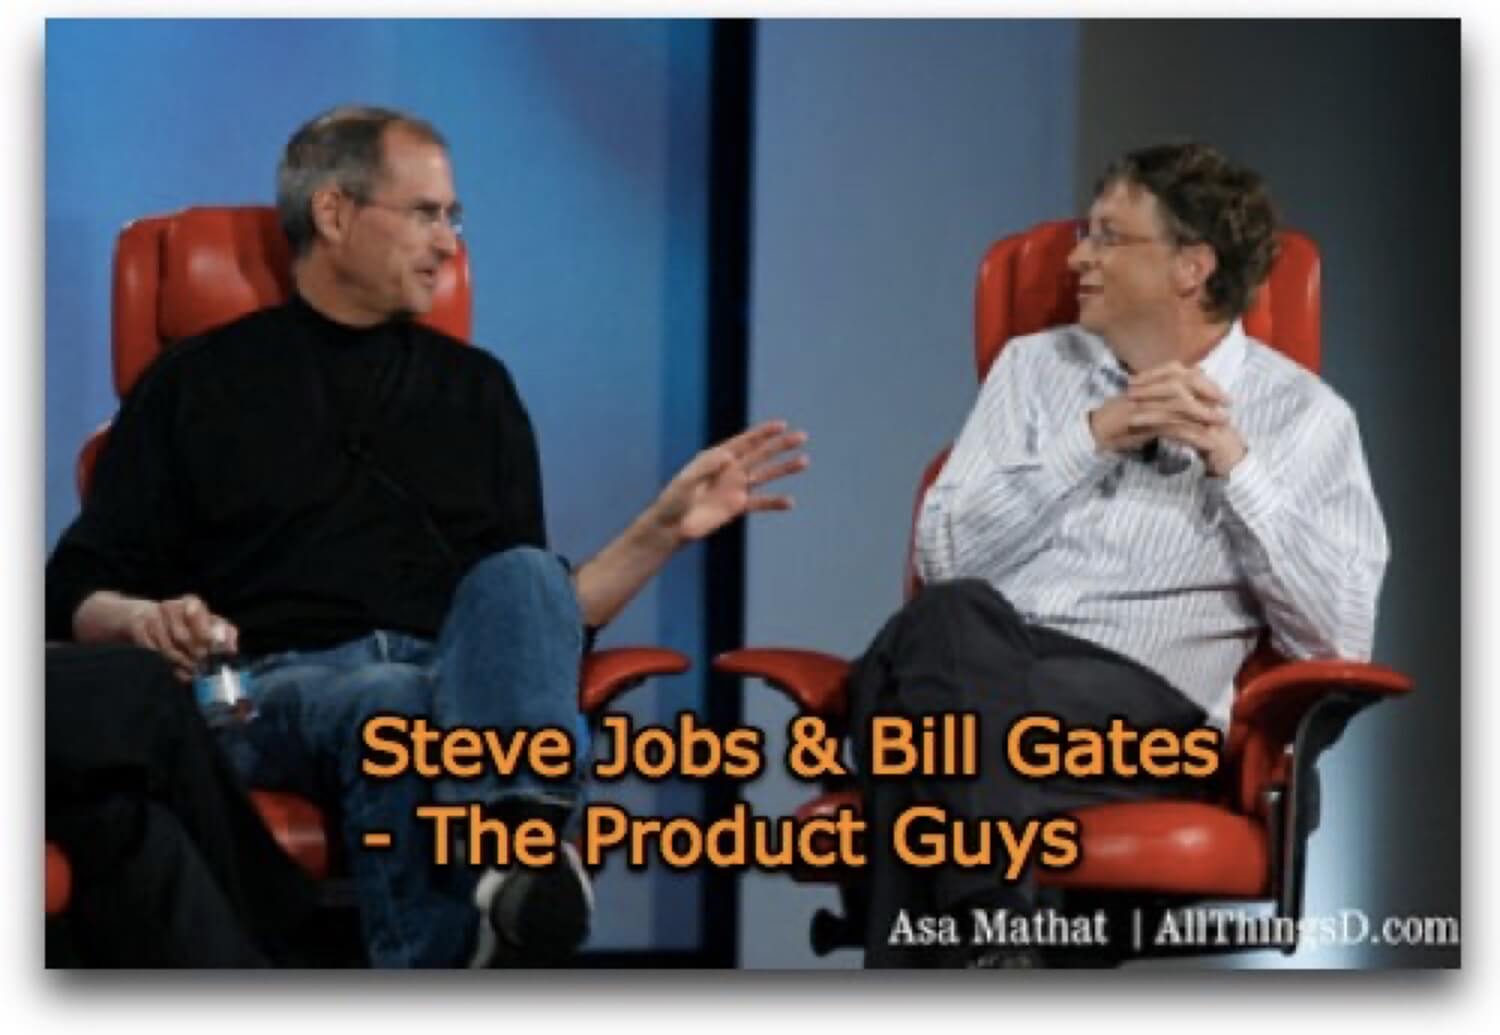 Product Guys succeed and inspire